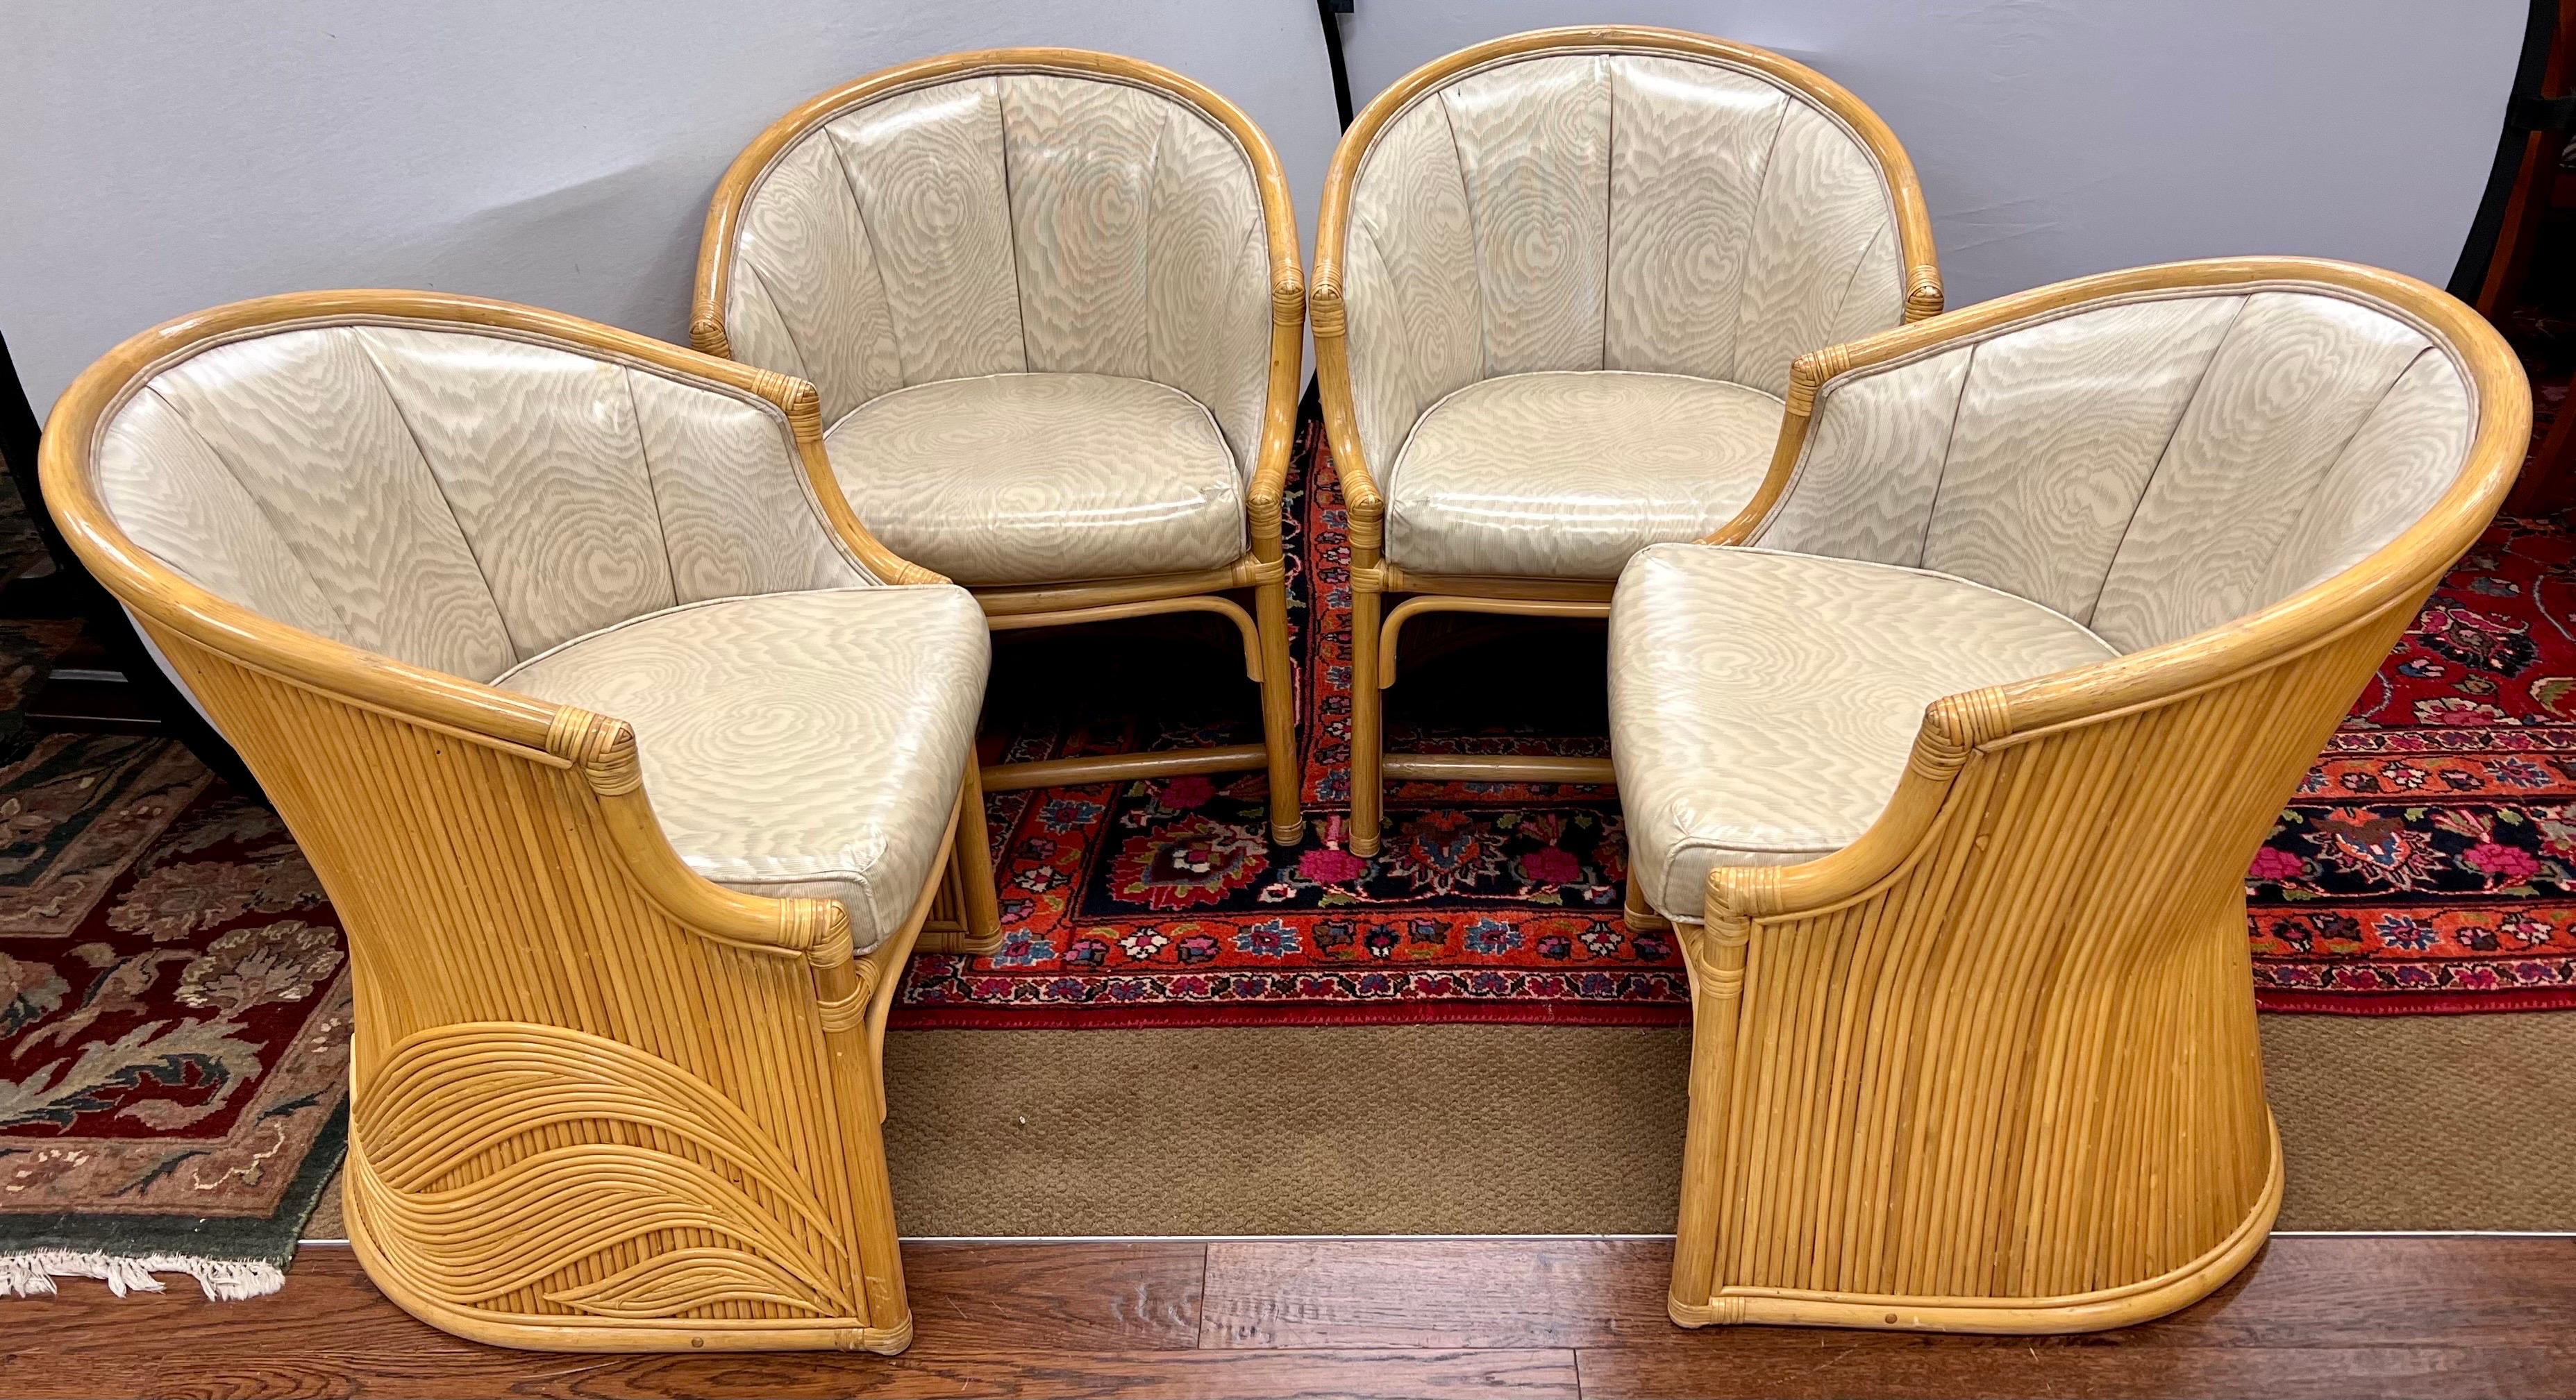 Stunning, ultra rare set of Mcguire bamboo dining chairs with gorgeous sculptural design on exterior, see pics. The chairs are upholstered in a neutral vinyl in very good vintage condition. See all pics. Regarding shipping, please reach out to us